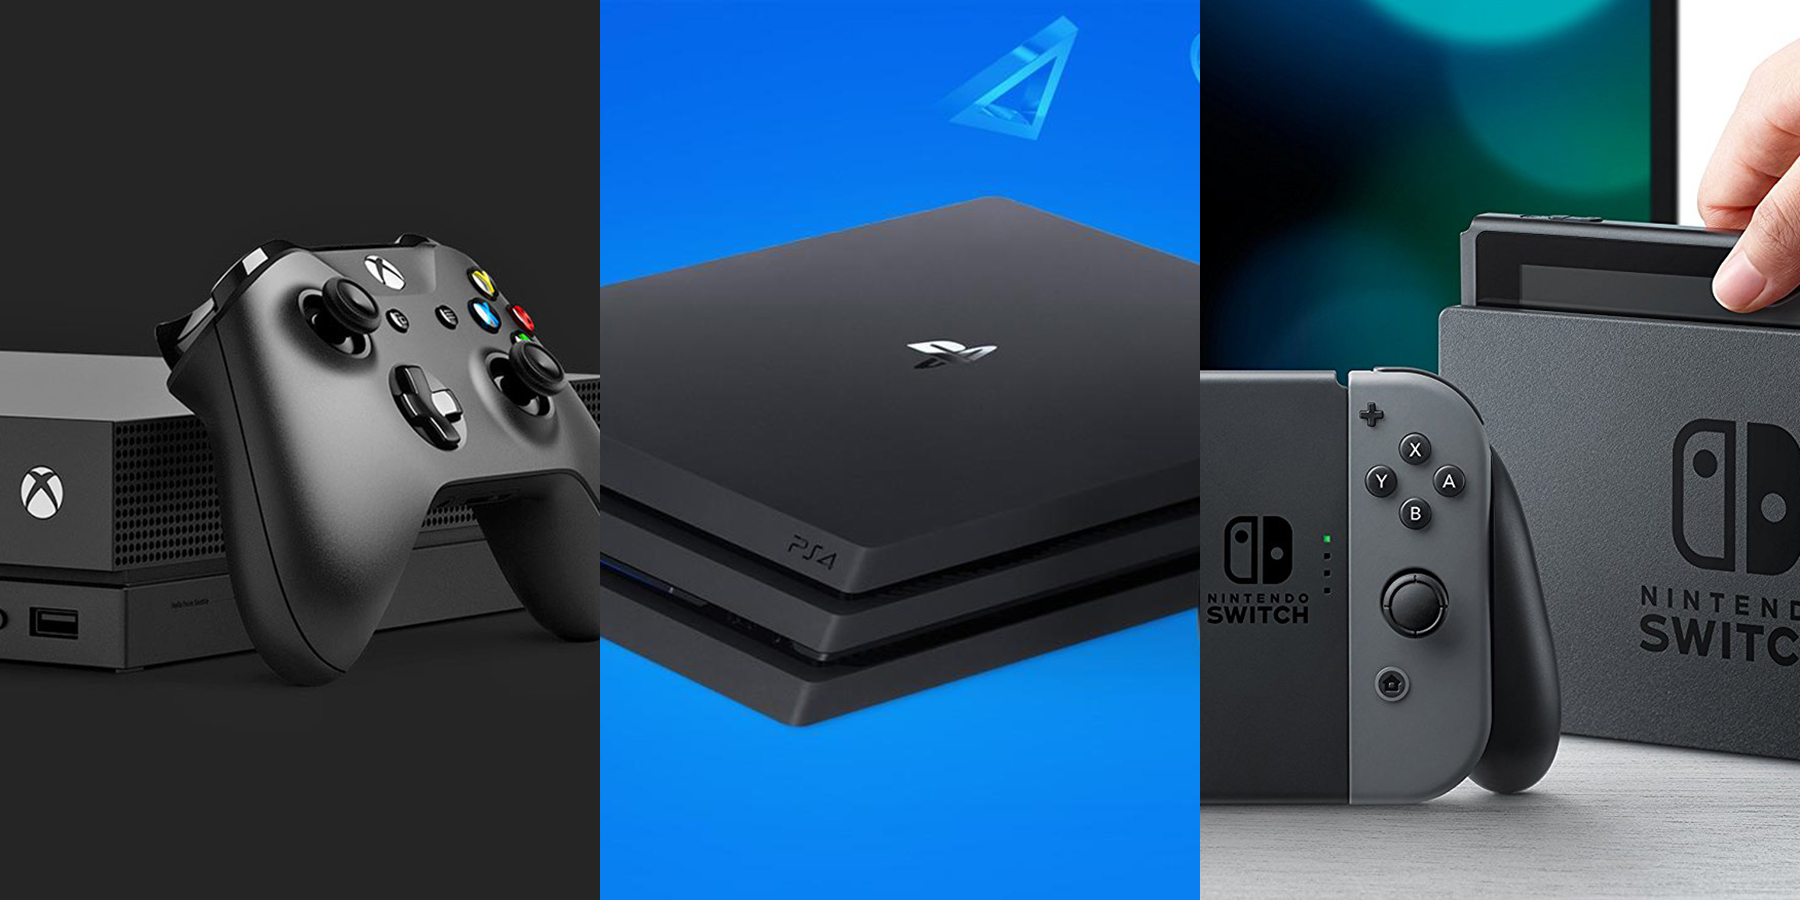 Which Console Has the Best 2018 Lineup? – HD Report1800 x 900